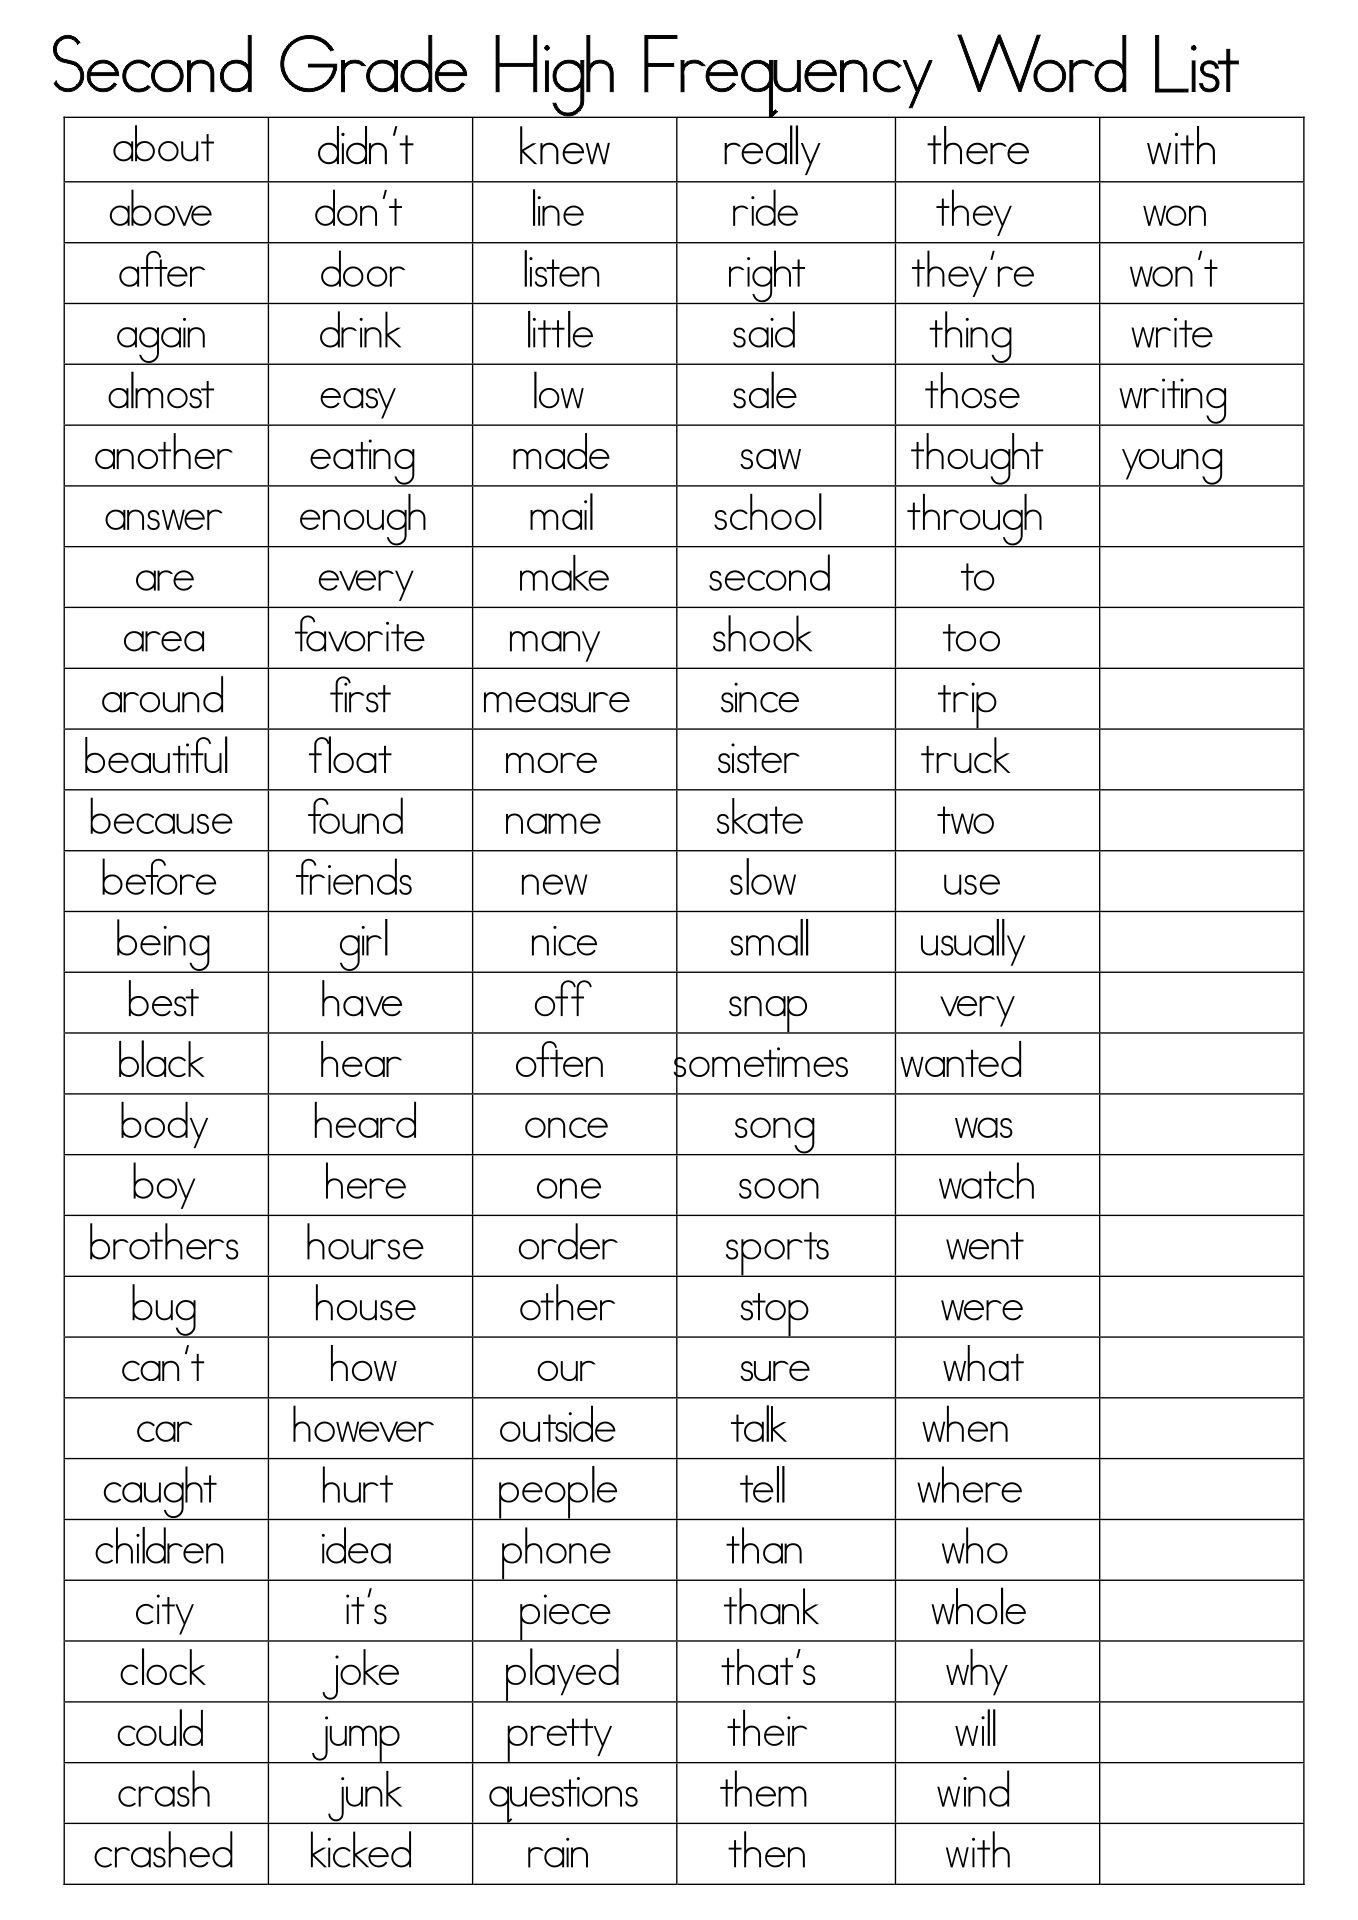 vocabulary-words-for-2nd-grade-word-wall-resource-in-2021